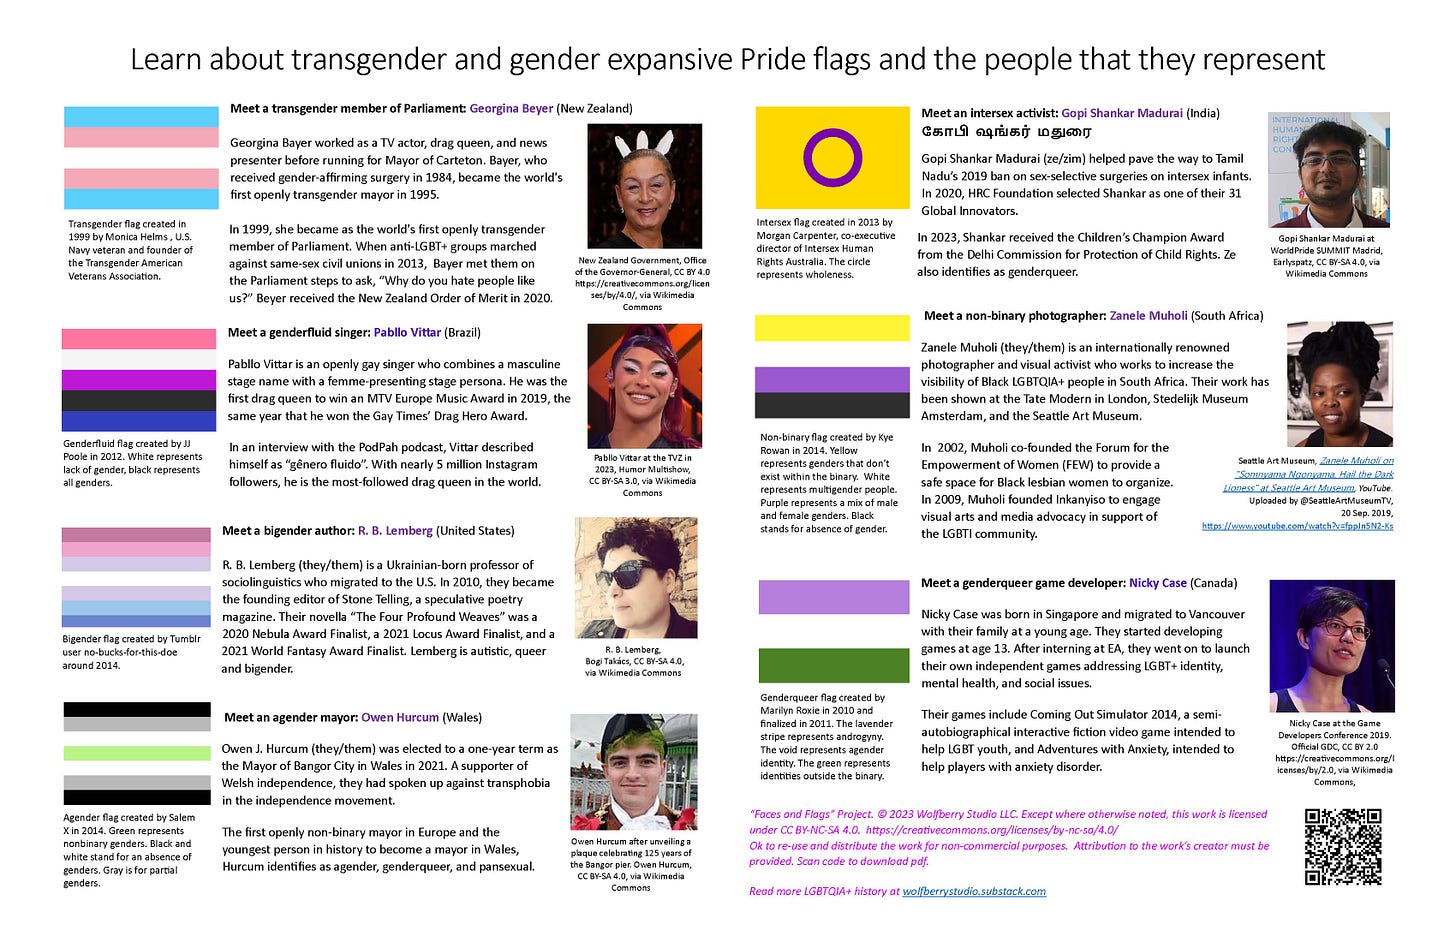 transgender, genderfluid, bigender, agender, intersex, non-binary and genderqueer flags with photos of individuals with representing identities.